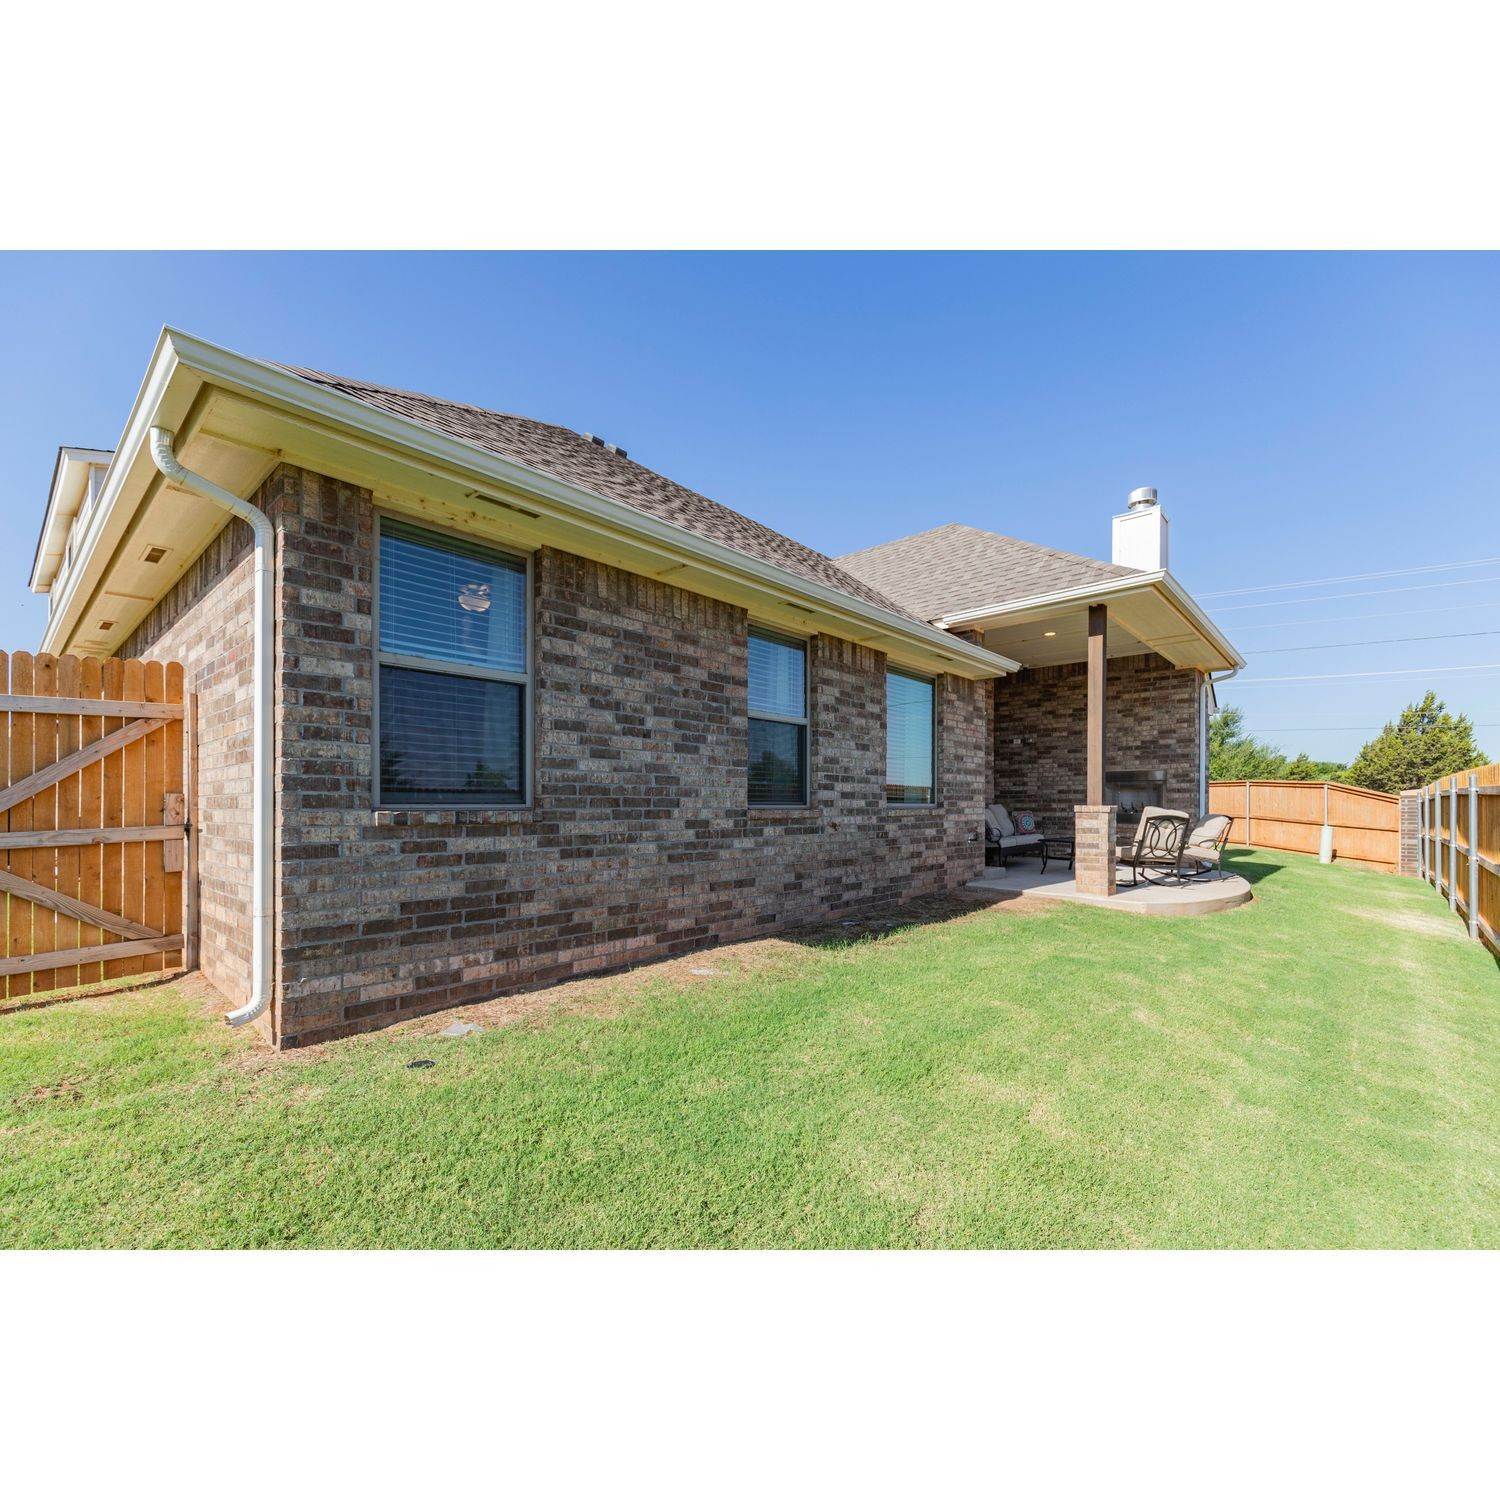 44. Canyons建于 10533 SW 52nd St, Mustang, OK 73064